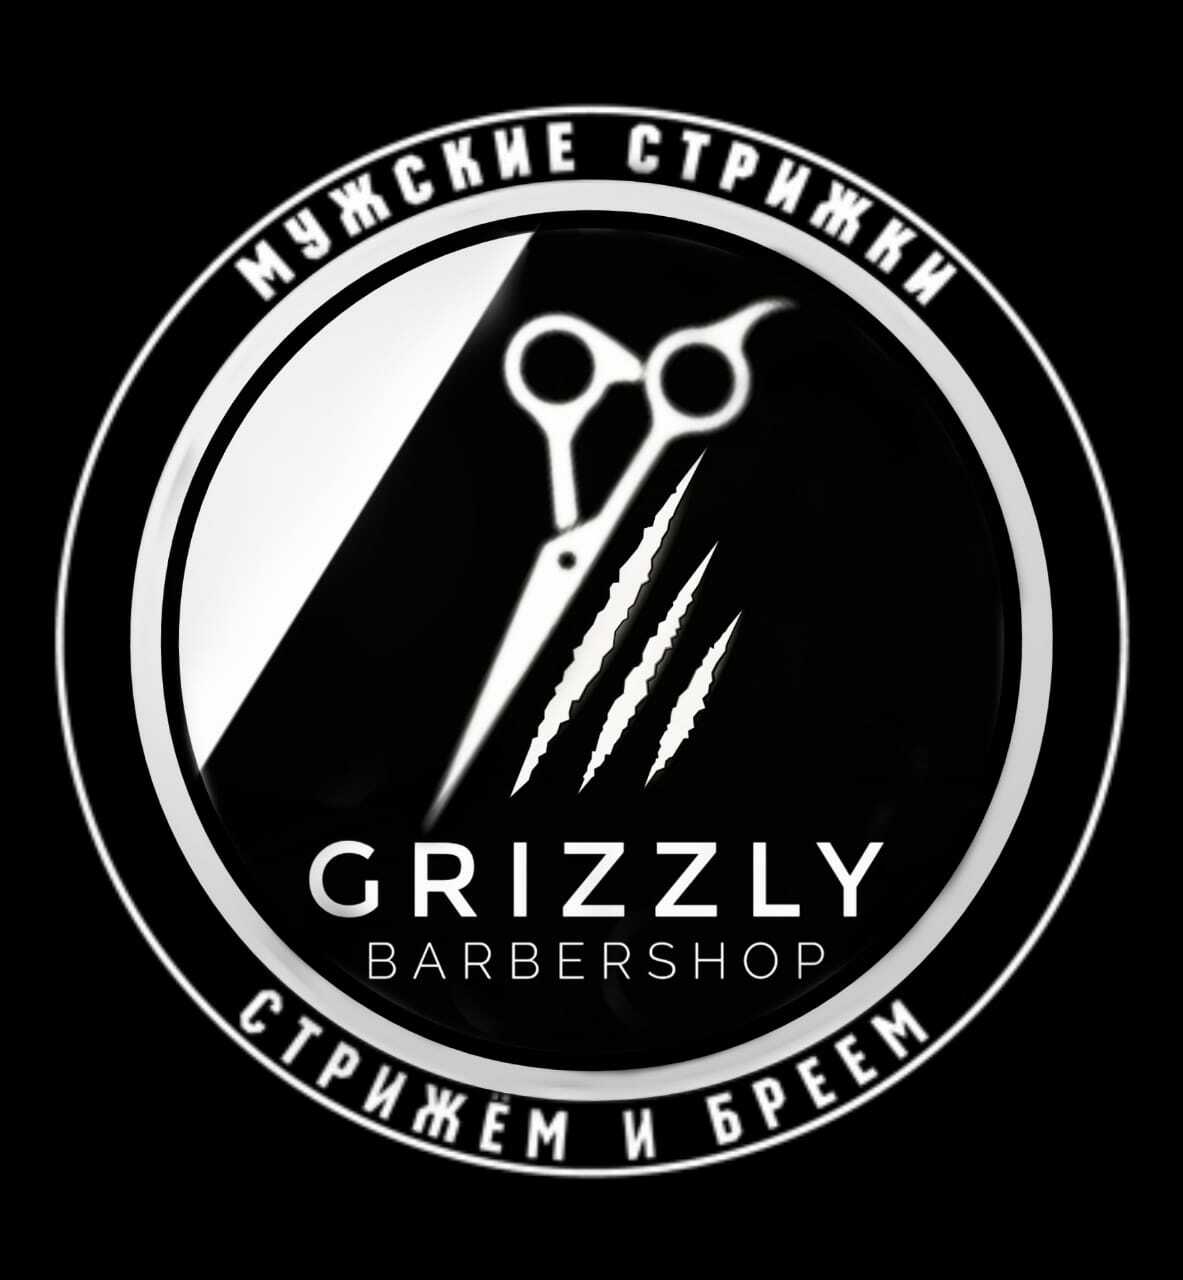 Barbershop GRIZZLY